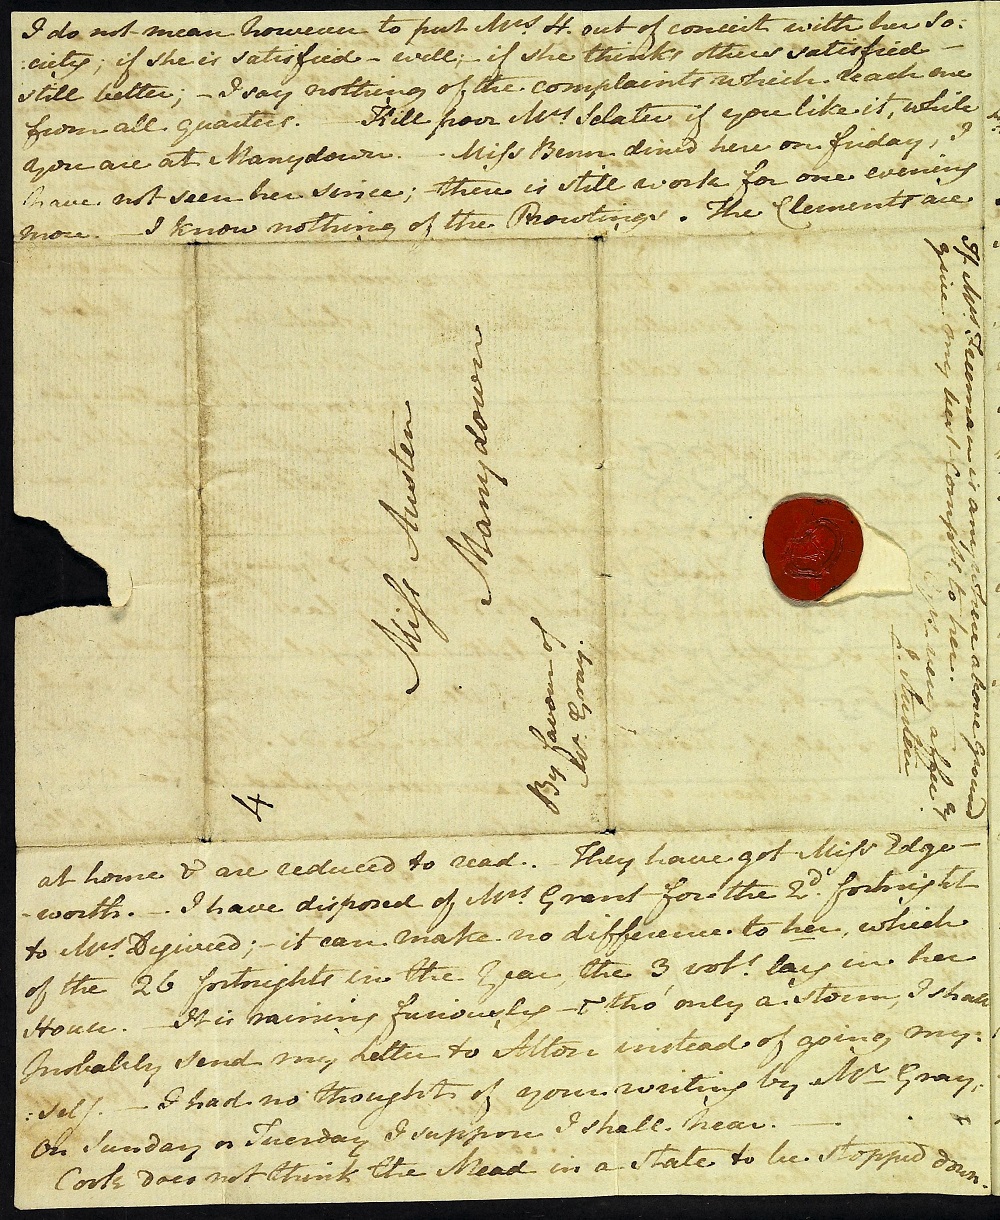 Letter from Jane Austen to Cassandra Austen, 9th February 1813. Page 4